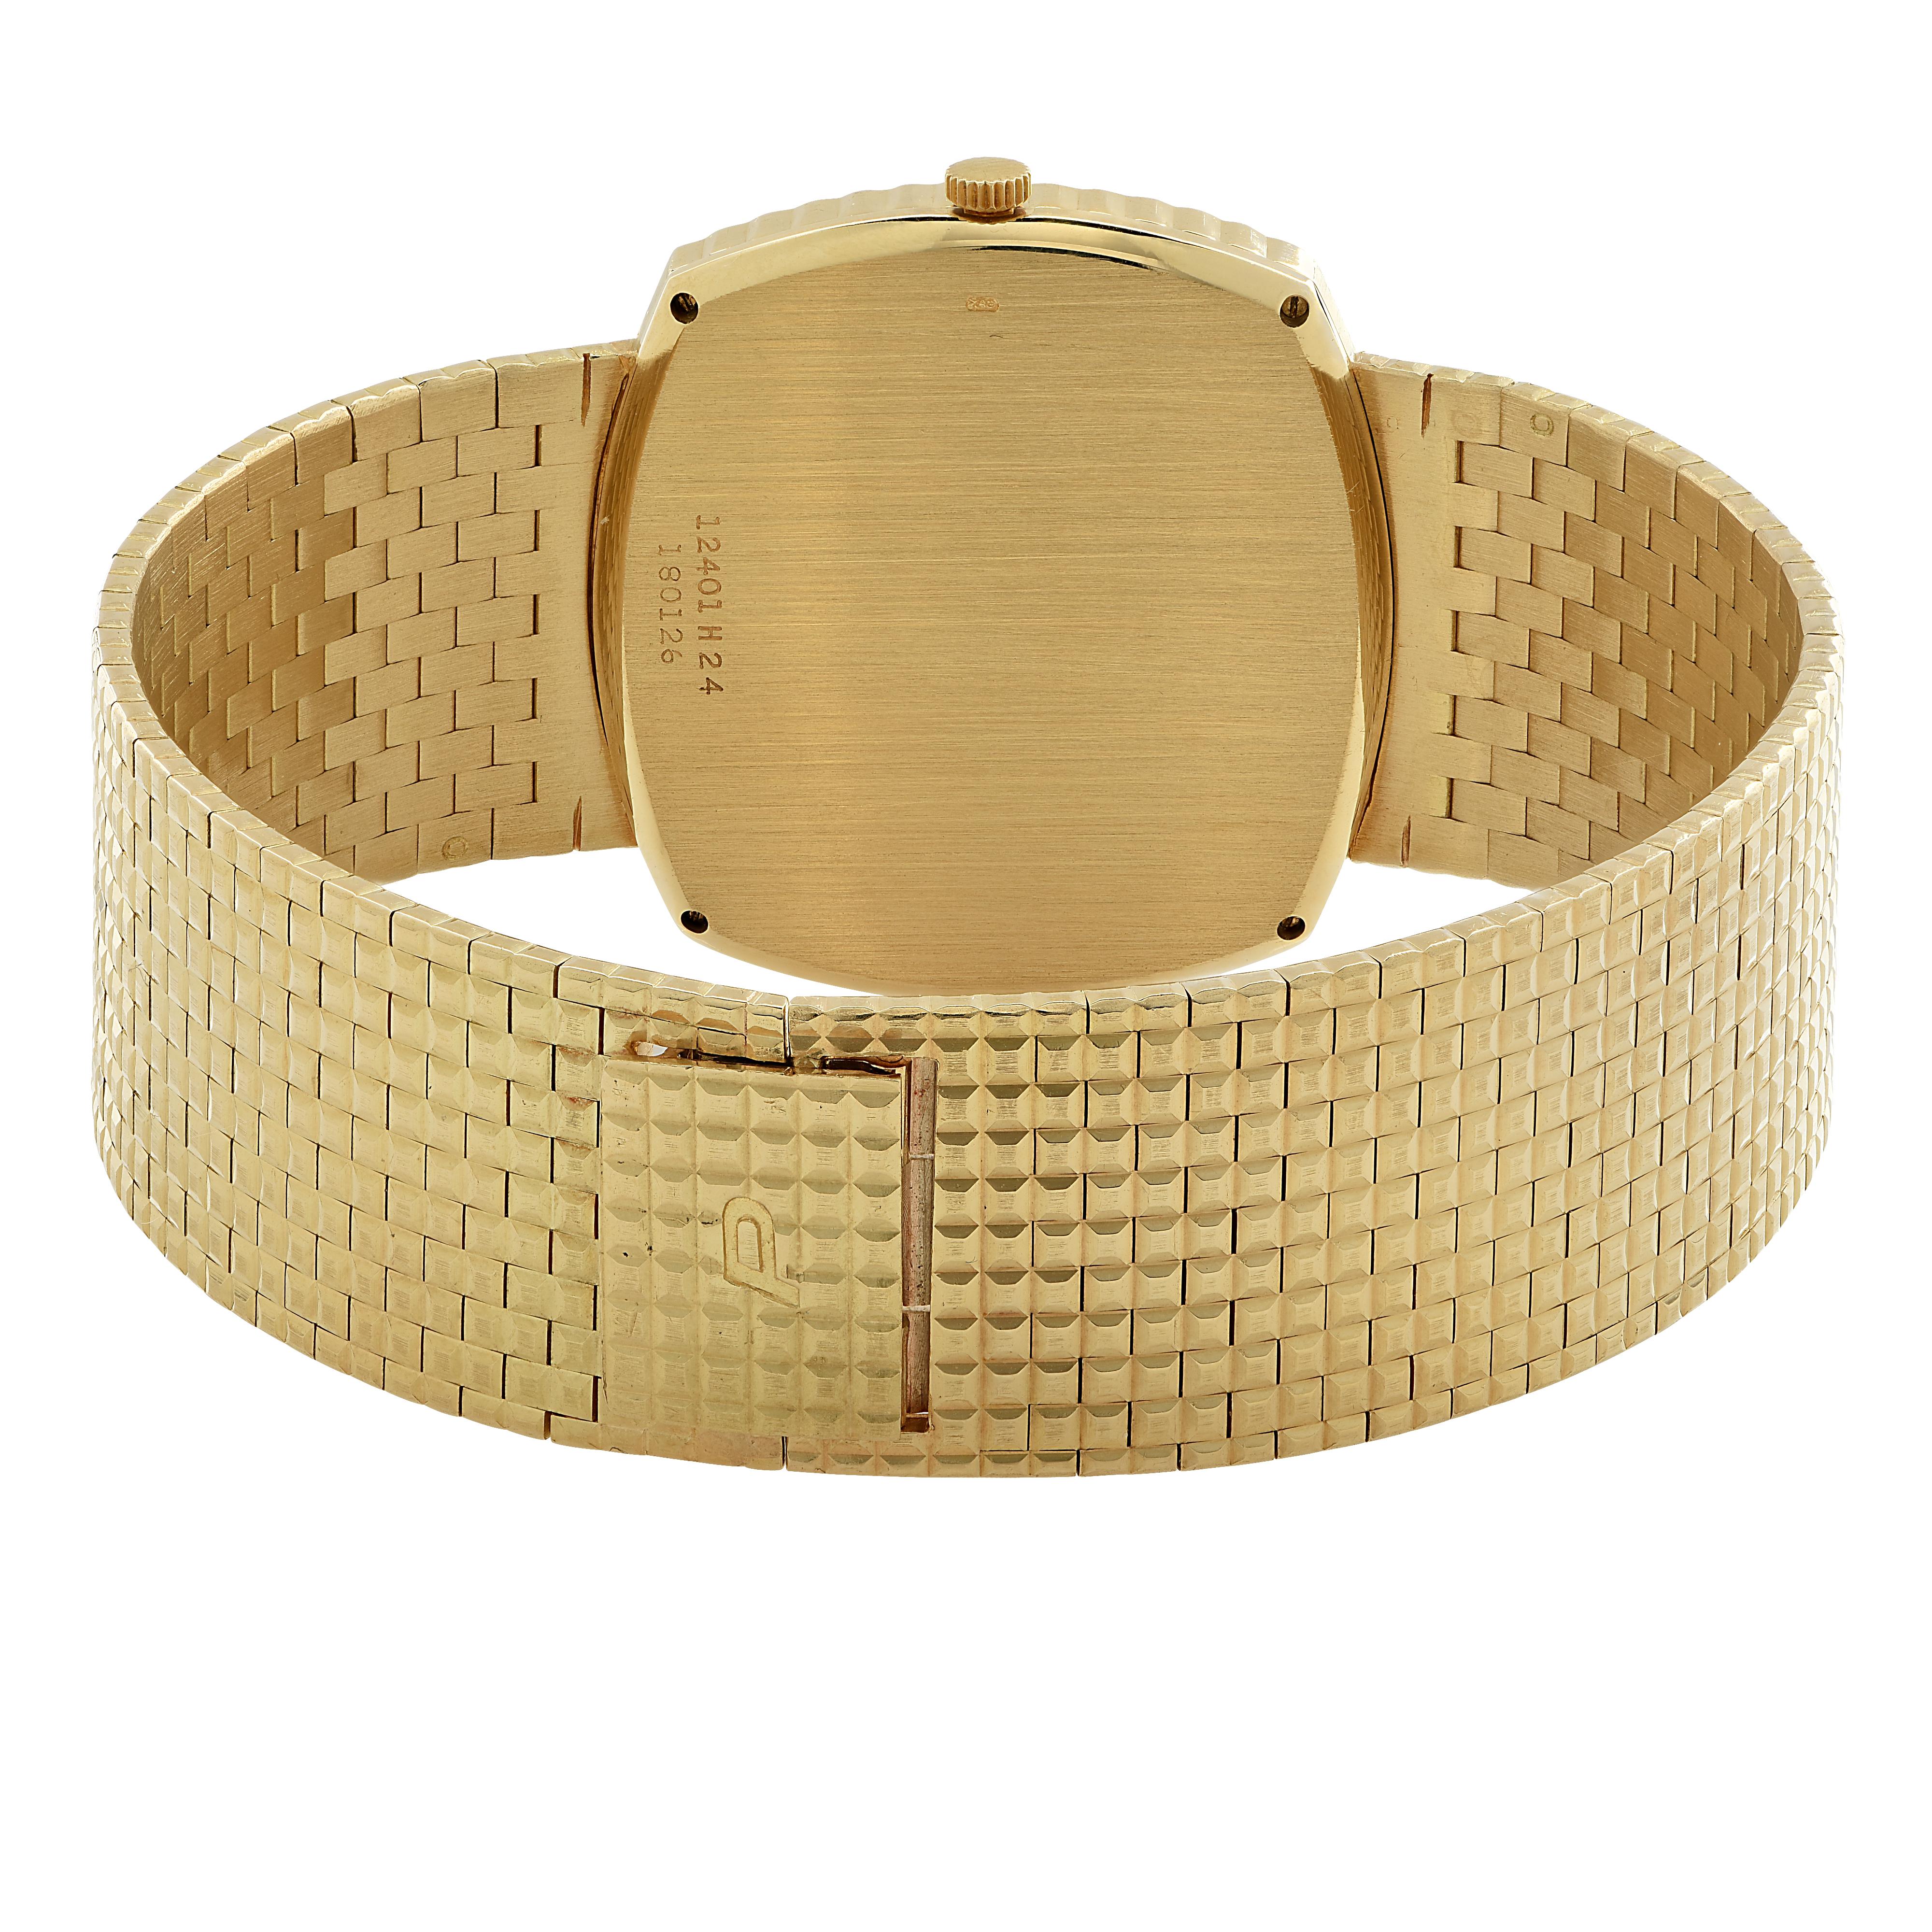 Piaget men’s wrist watch, circa 1980s, crafted in 18 karat yellow gold with a Tiger’s Eye dial measuring 33 mm in diameter. This watch has a manual wind movement, case no. 12401 H 24, Serial no. 180126. The strap measures 7.5 inches in length and .8